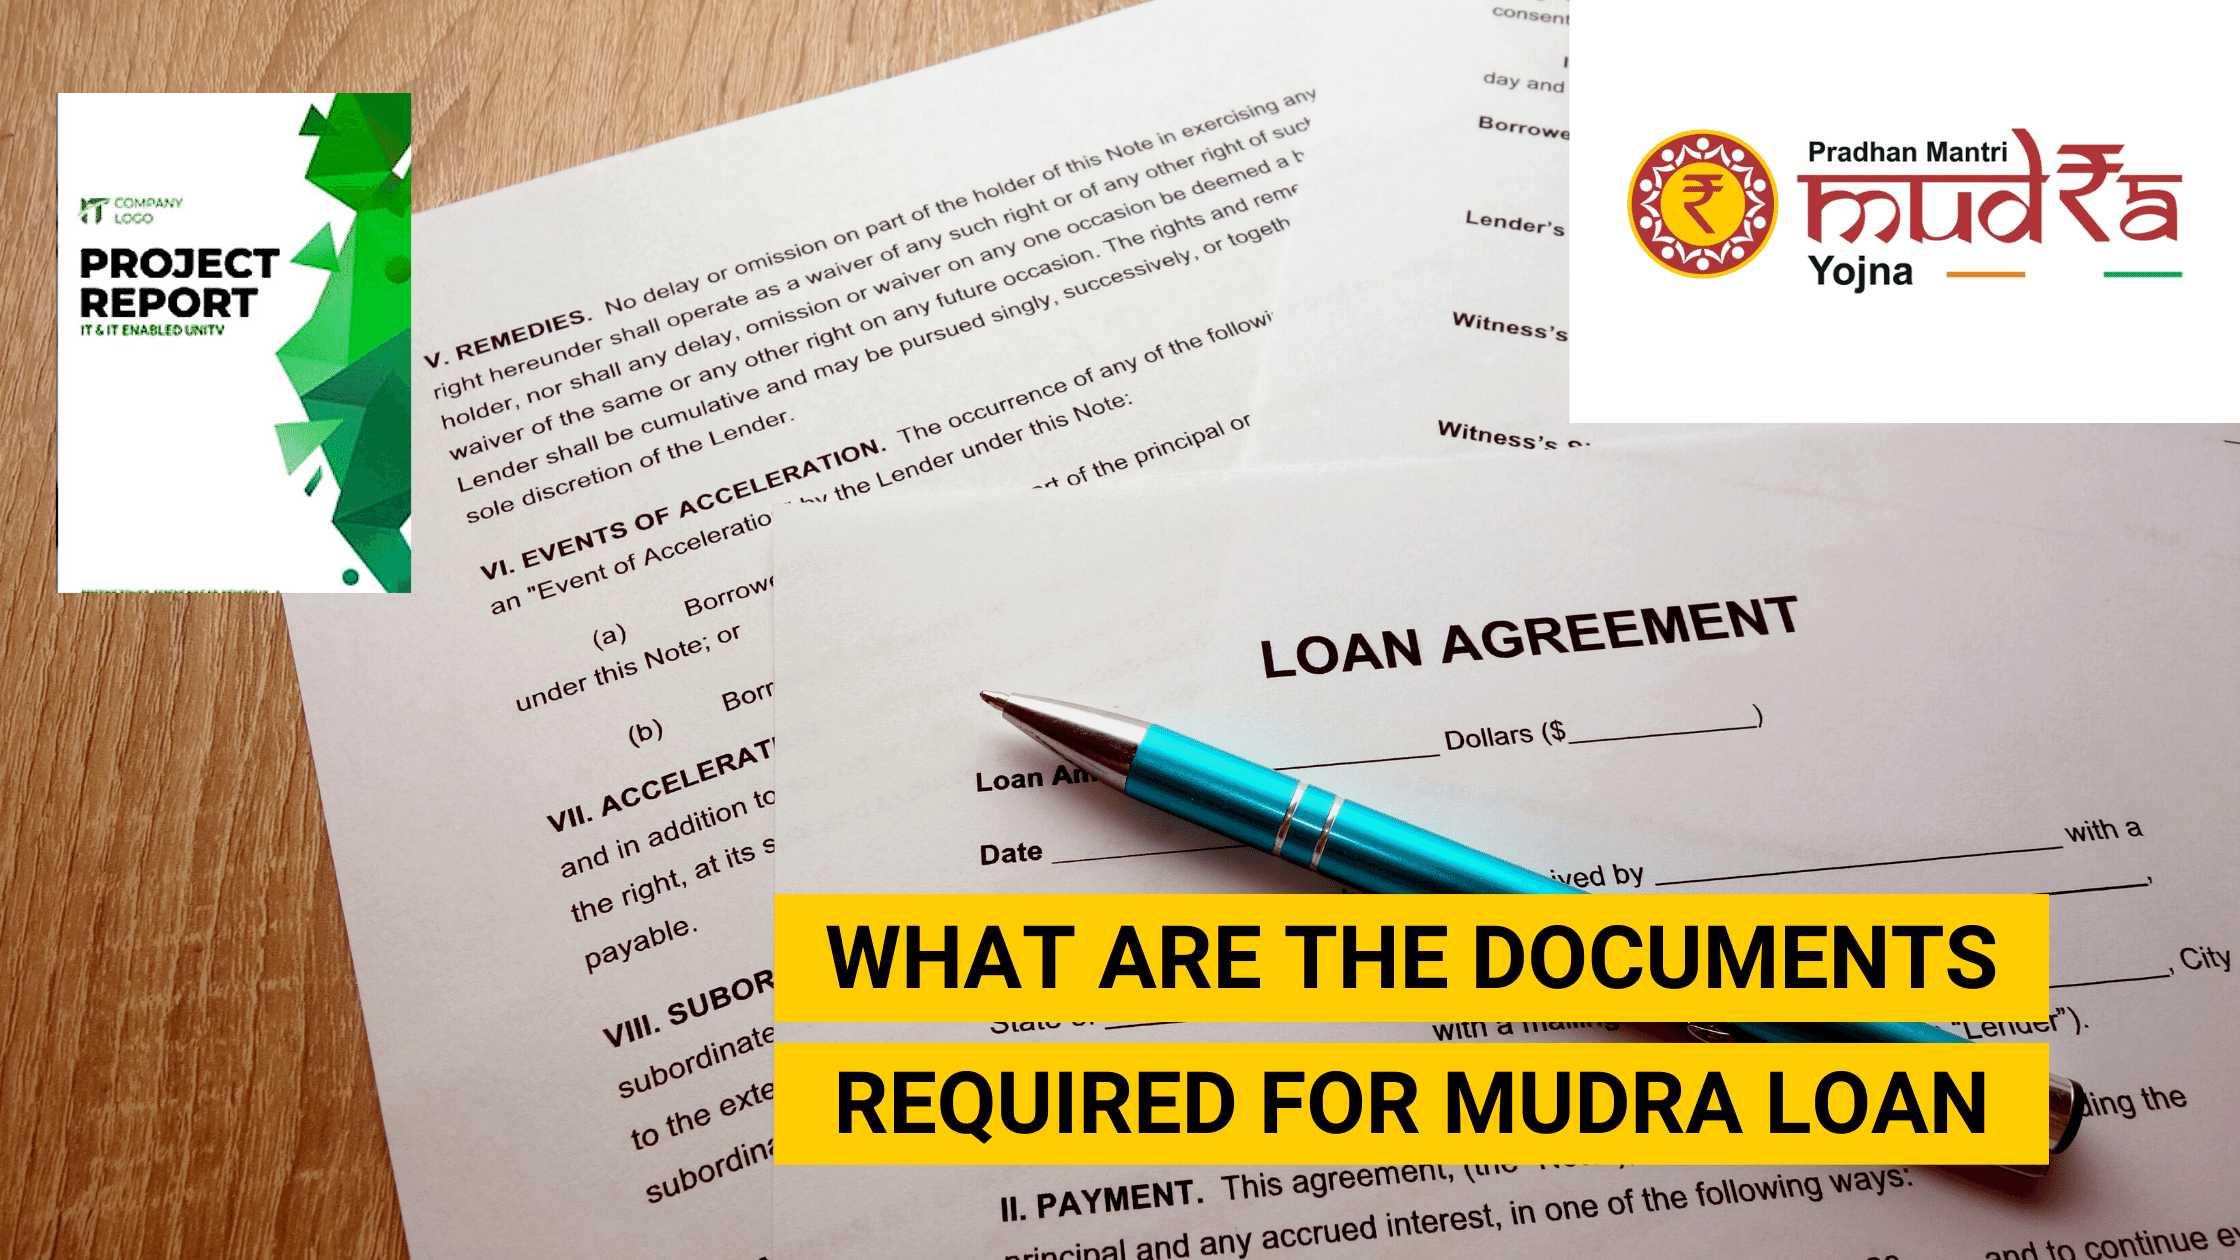 What are the documents required for MUDRA Loan